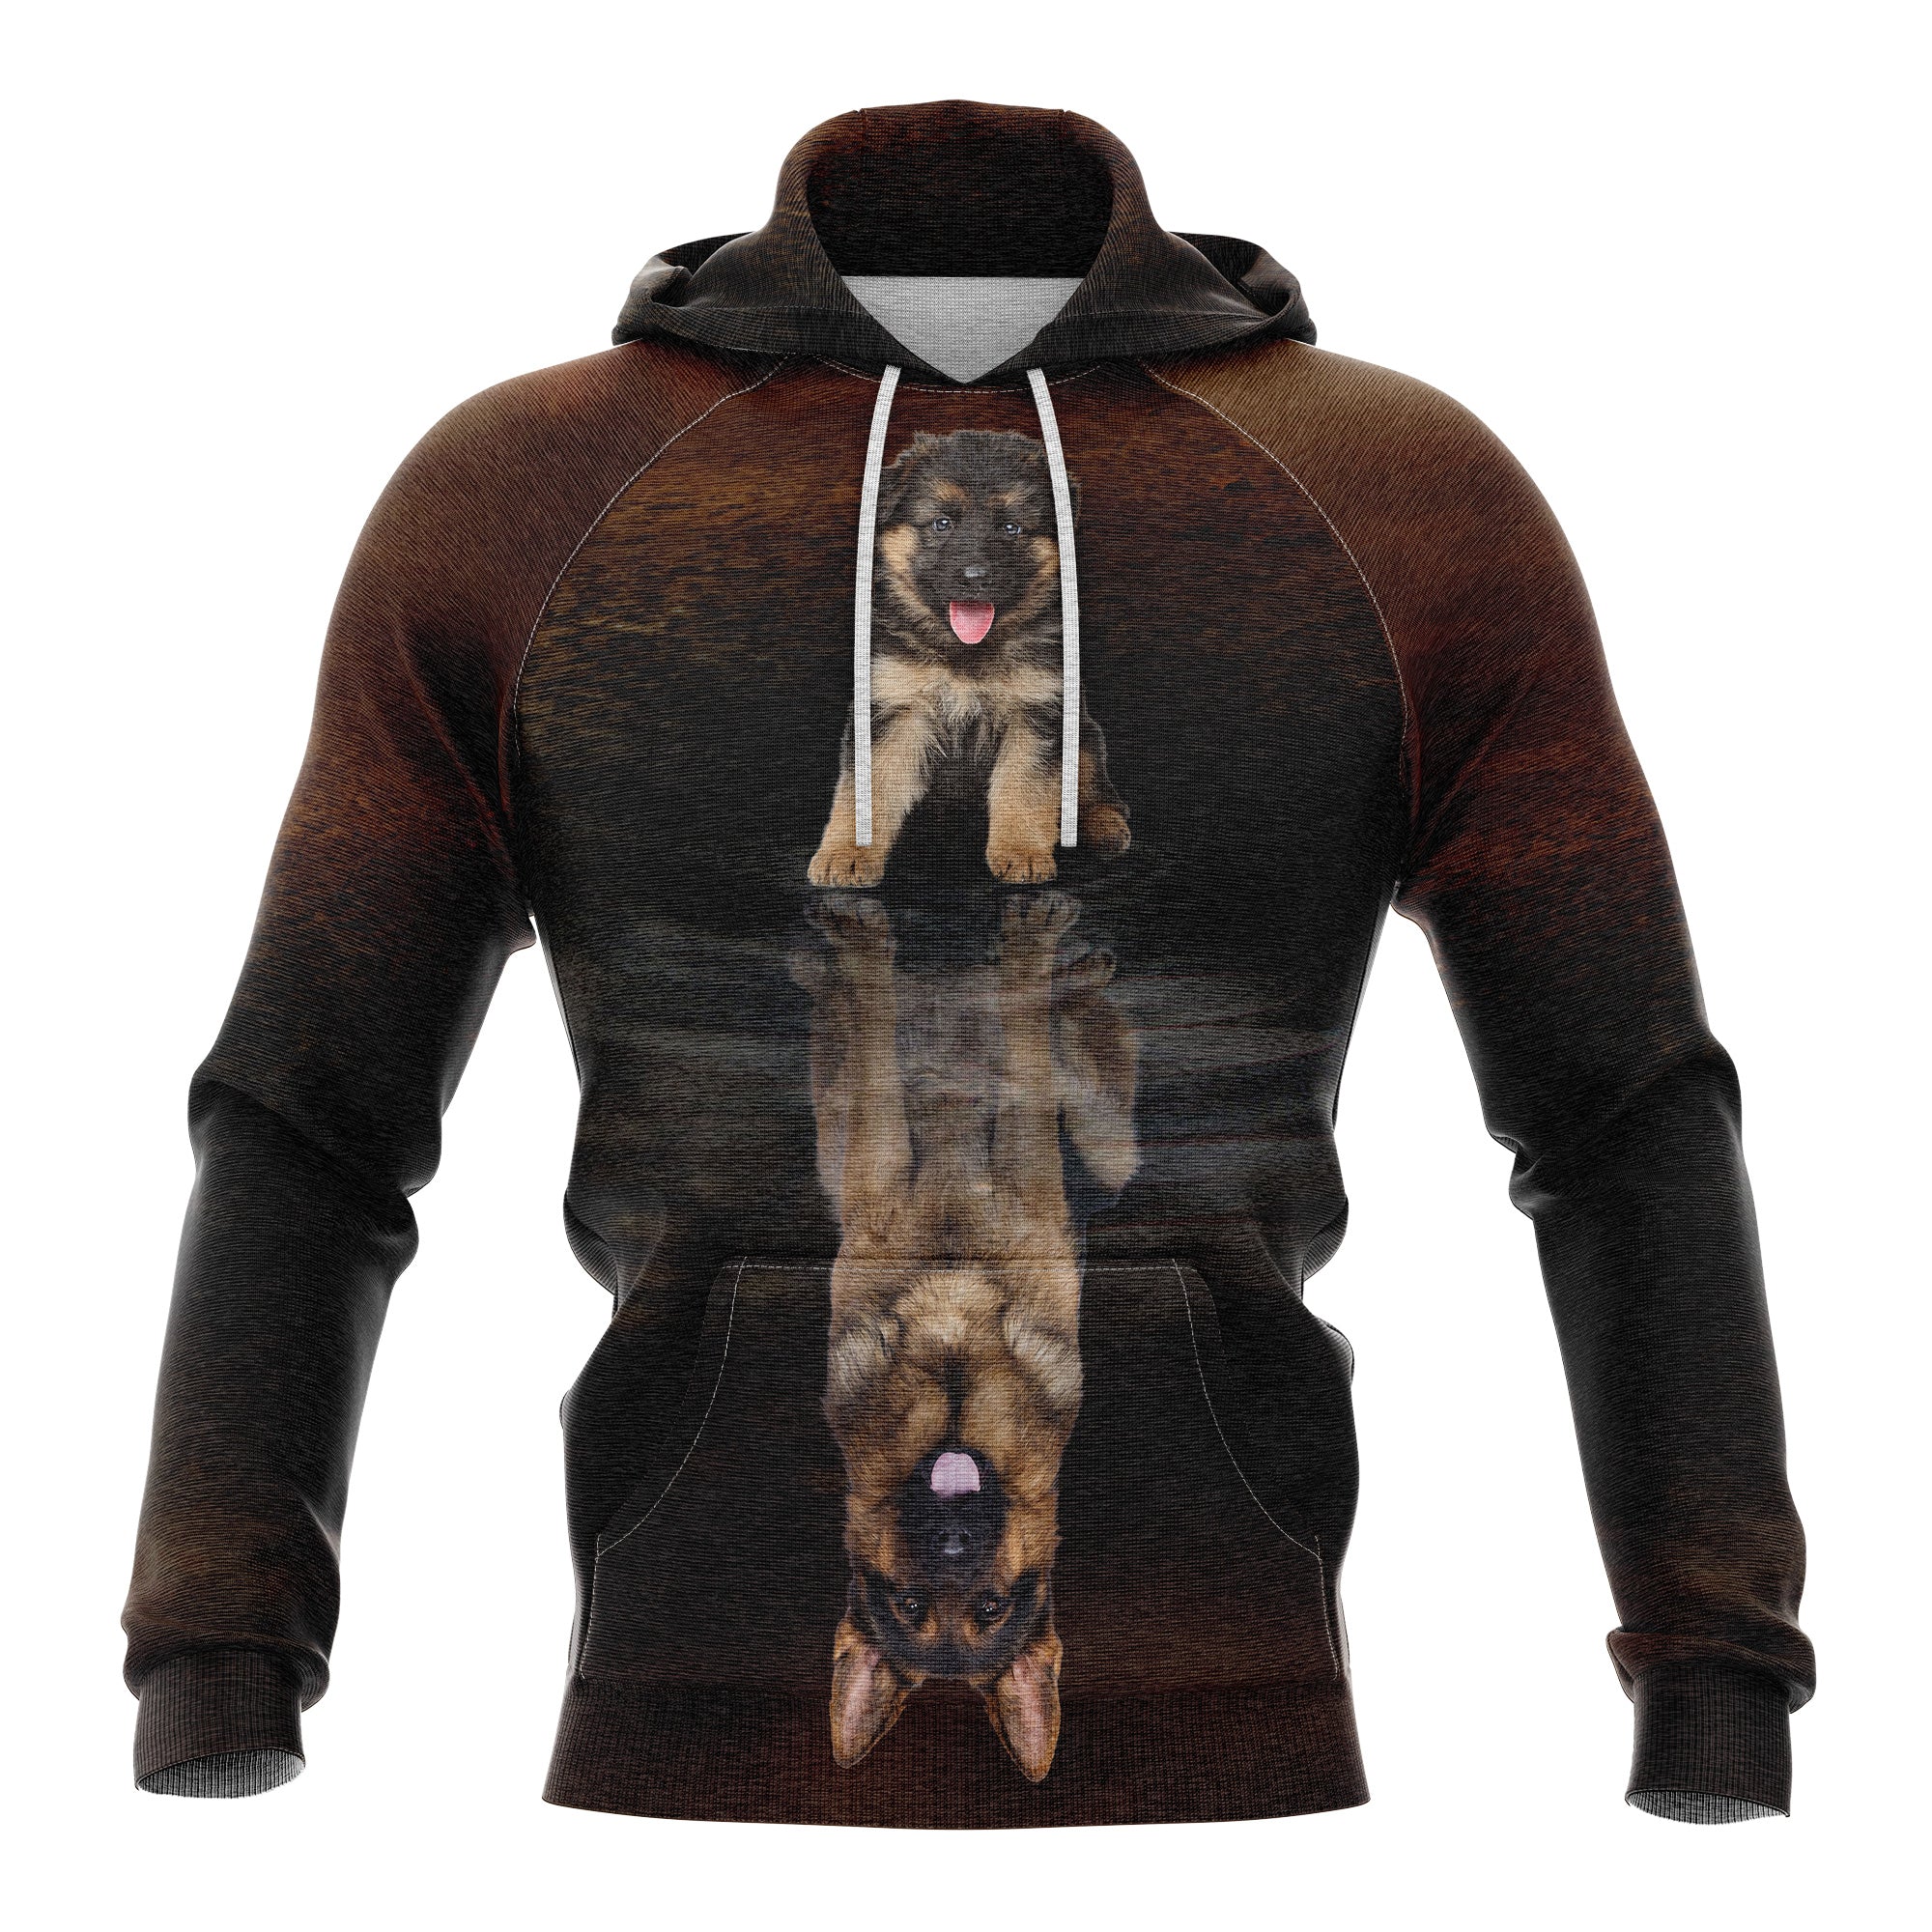 Awesome German Shepherd Reflection Premium Brown Hoodie, Perfect Outfit For Men And Women On Christmas New Year Autumn Winter